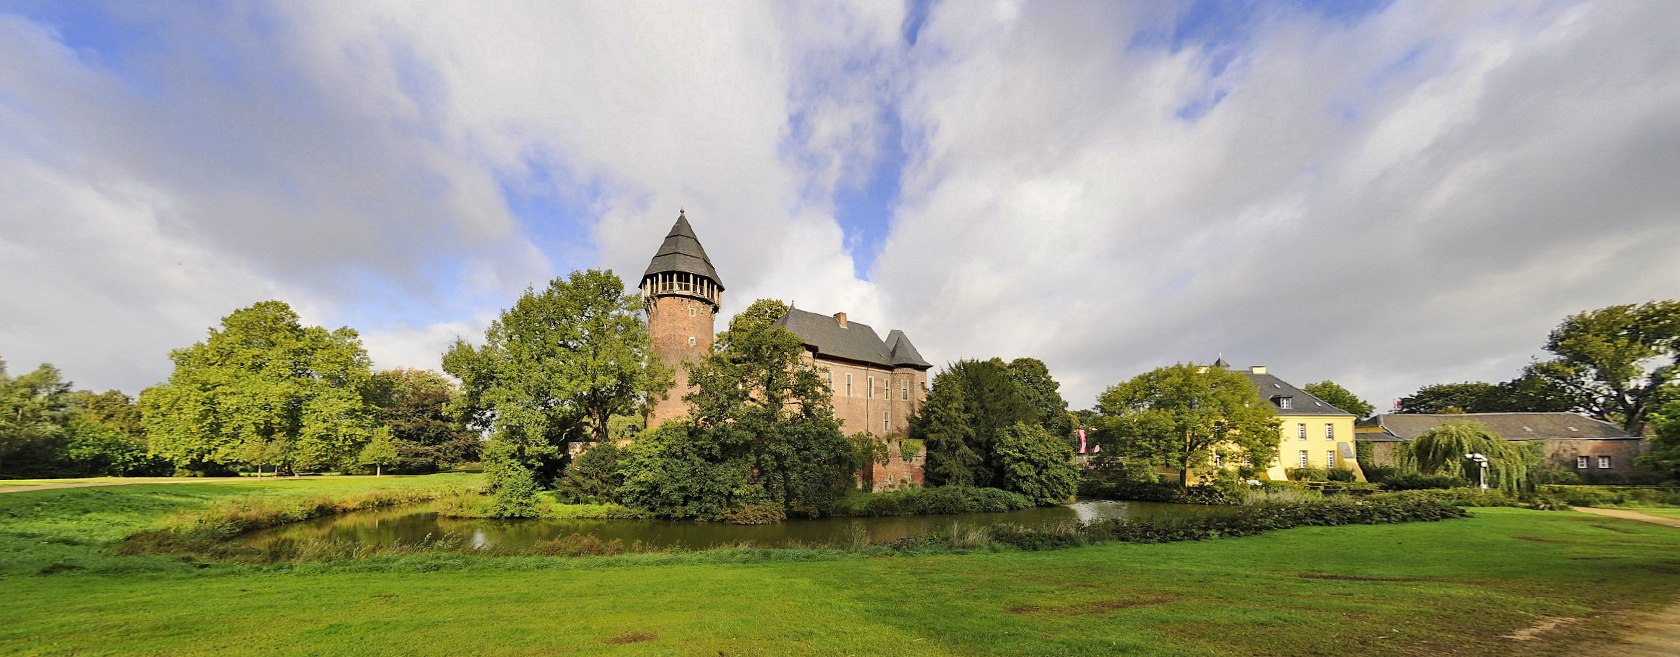 Museum Burg Linn is situated in a beautiful park that hosts the famous Flachsmarkt event once a year, © Stadt Krefeld